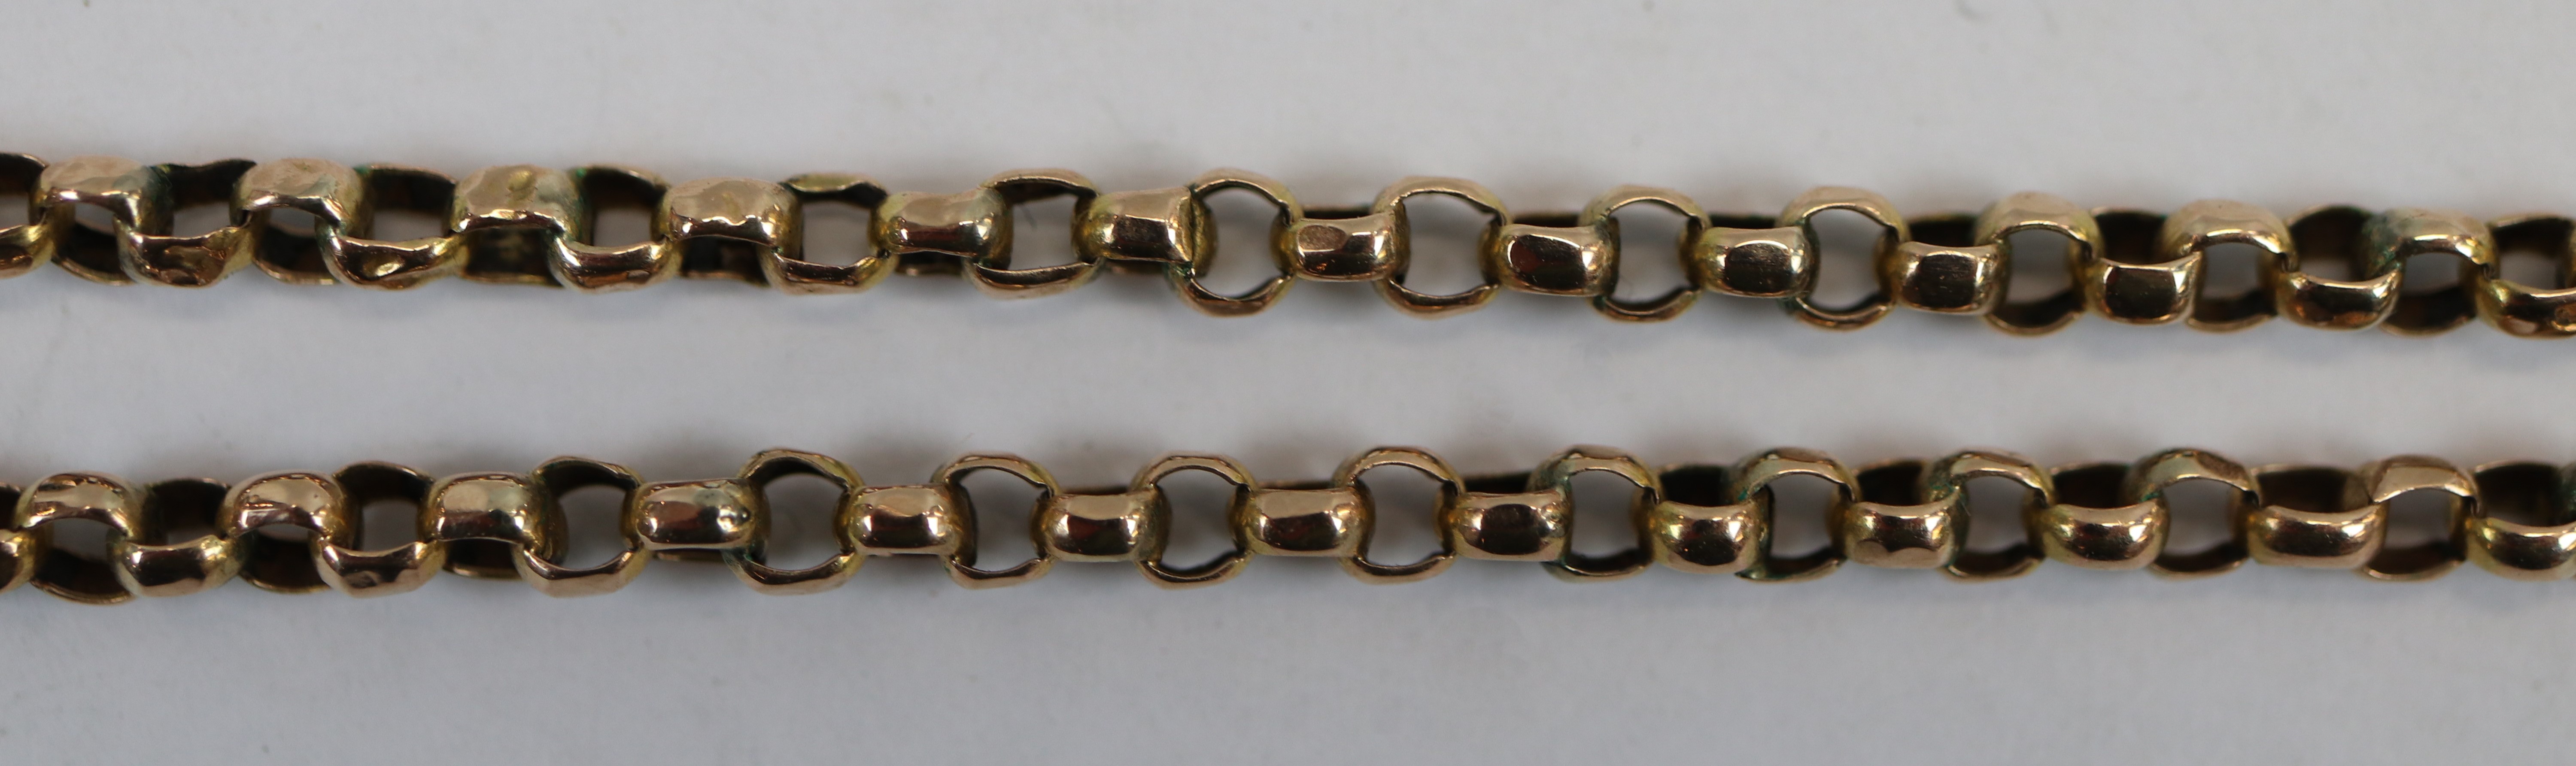 9ct gold chain - Approx weight: 5.6g - Image 2 of 2